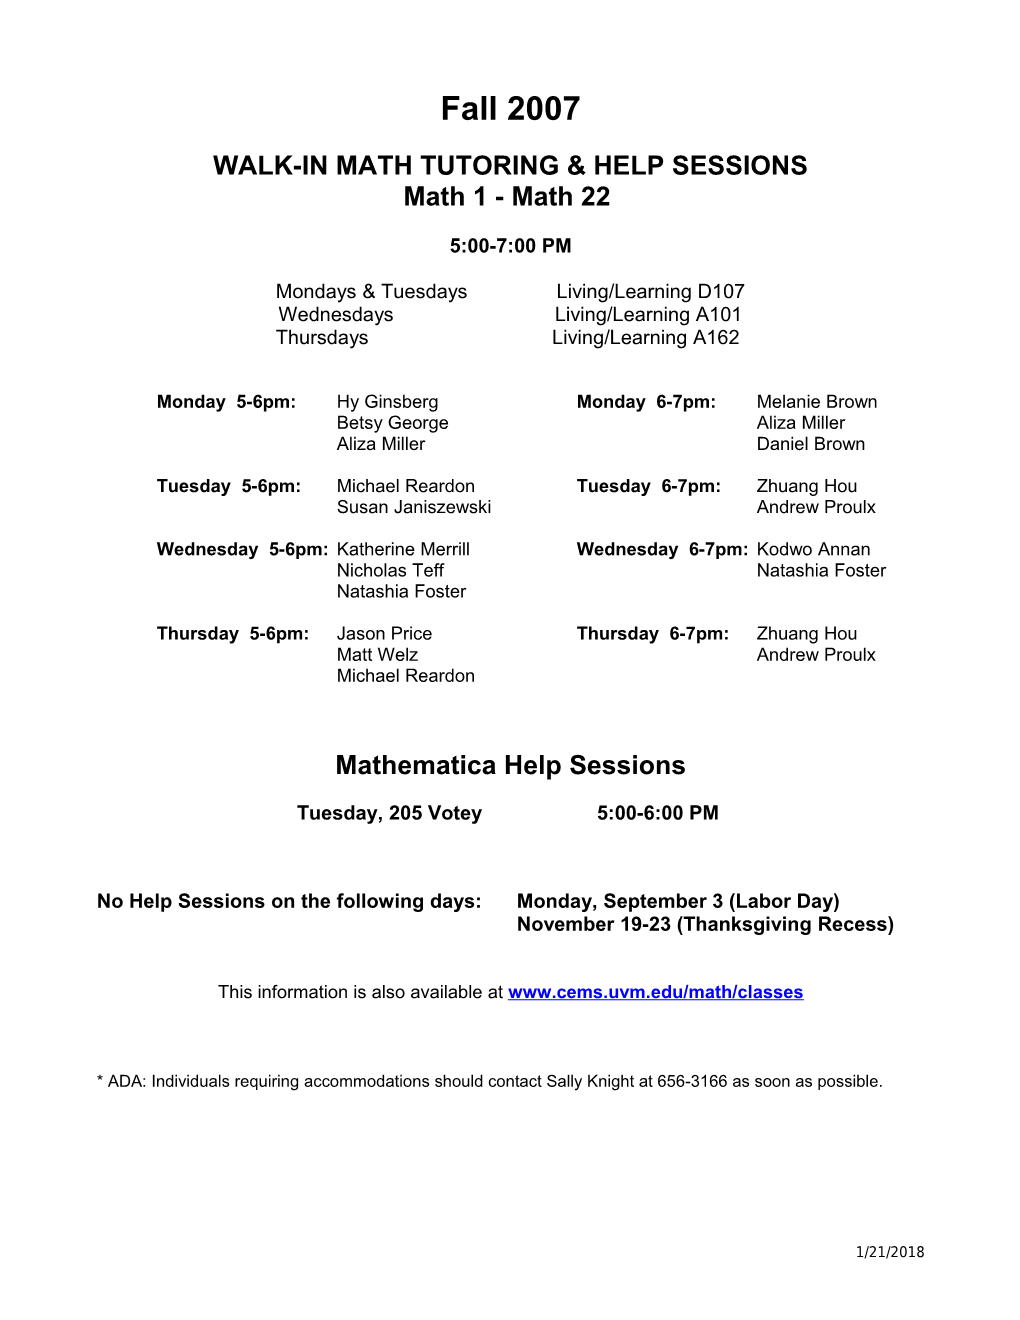 Walk-In Math Tutoring & Help Sessions